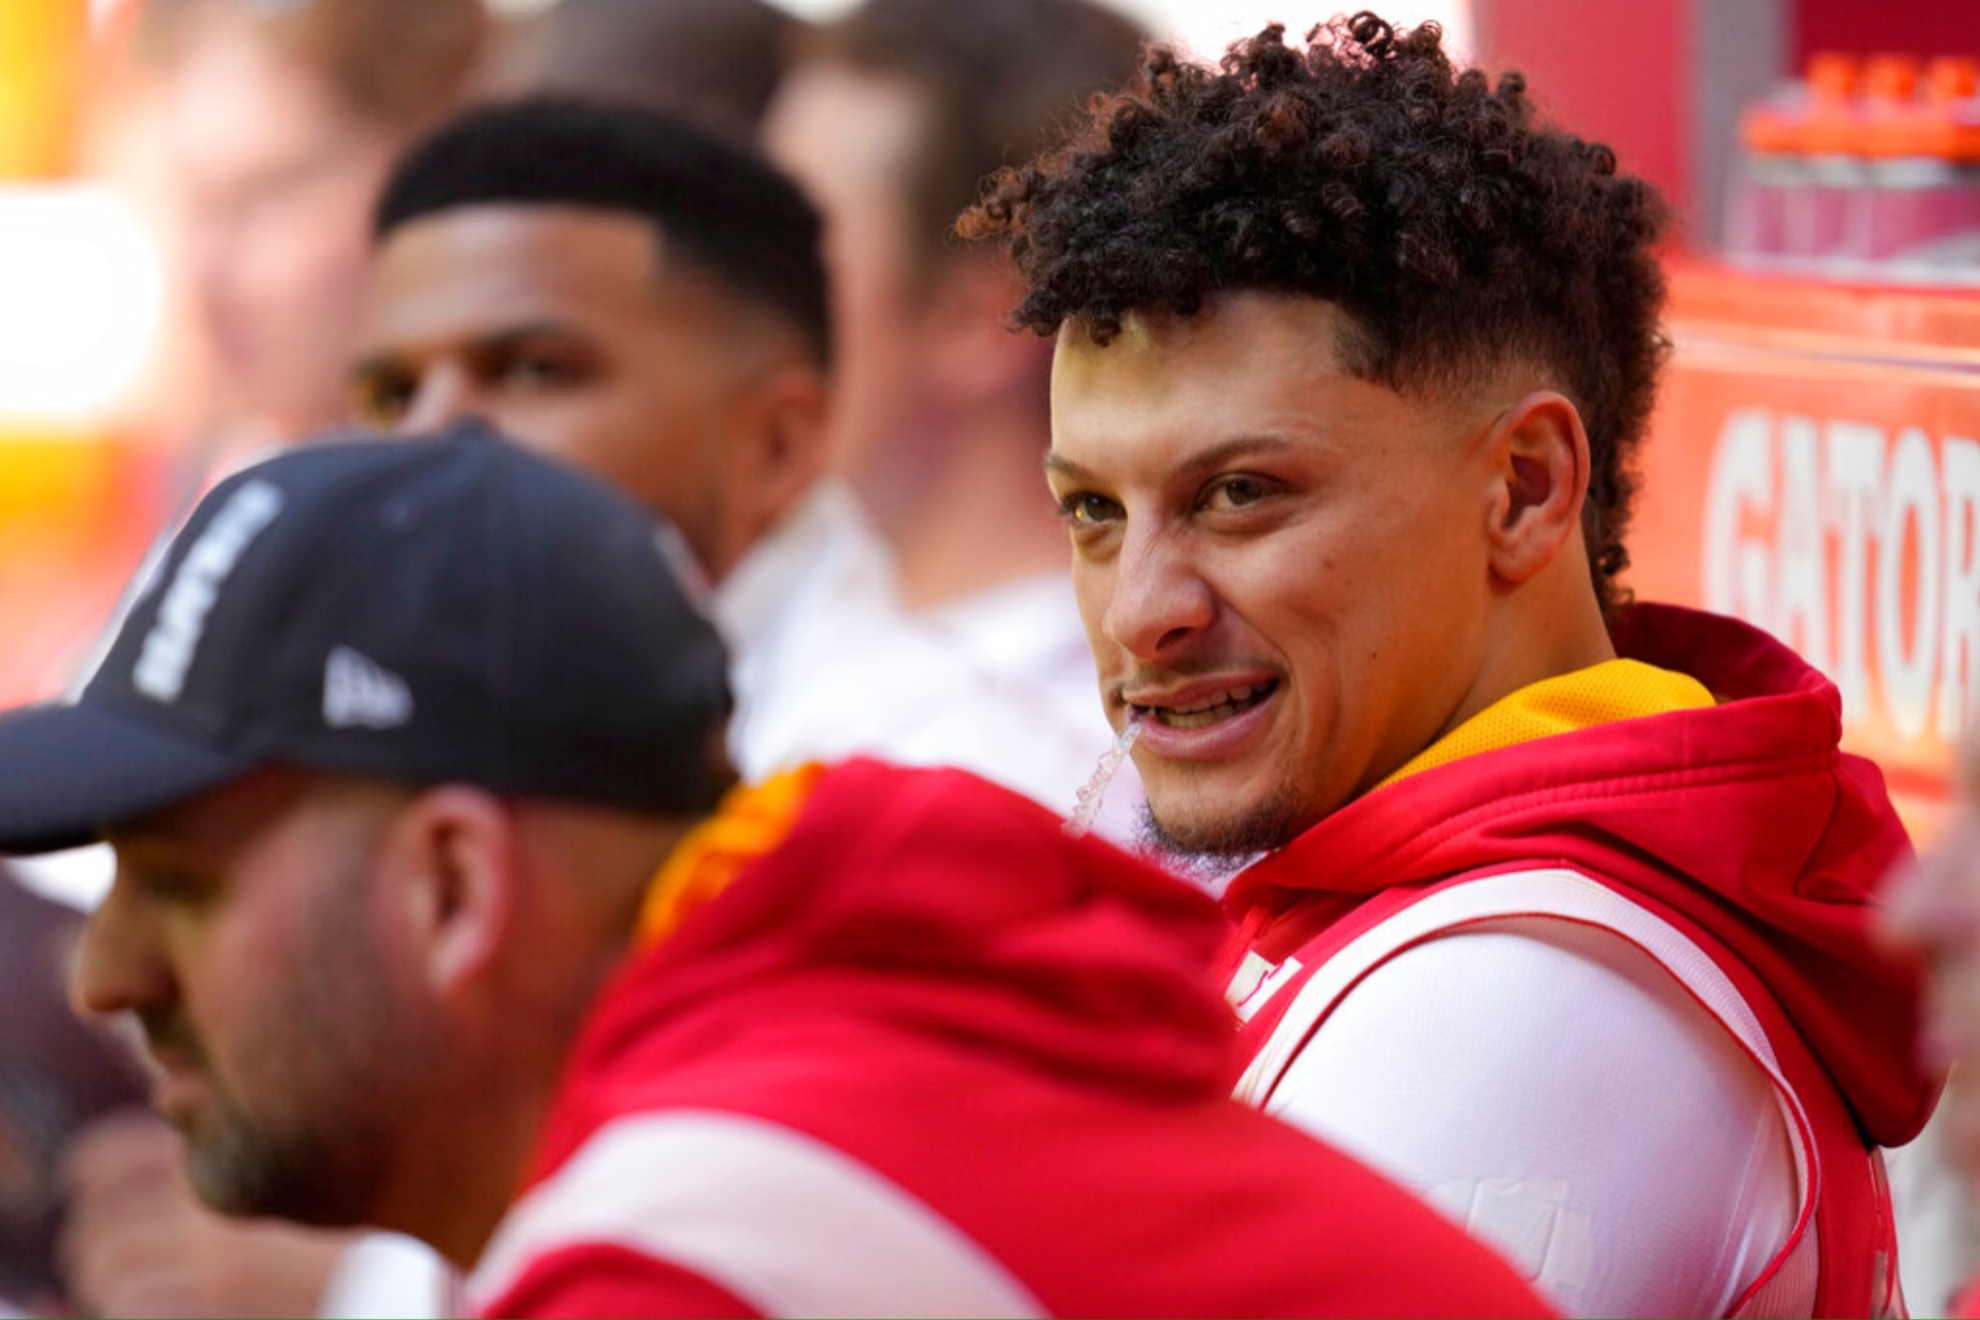 Patrick Mahomes made waves on social media after deleting tweets about Diddy